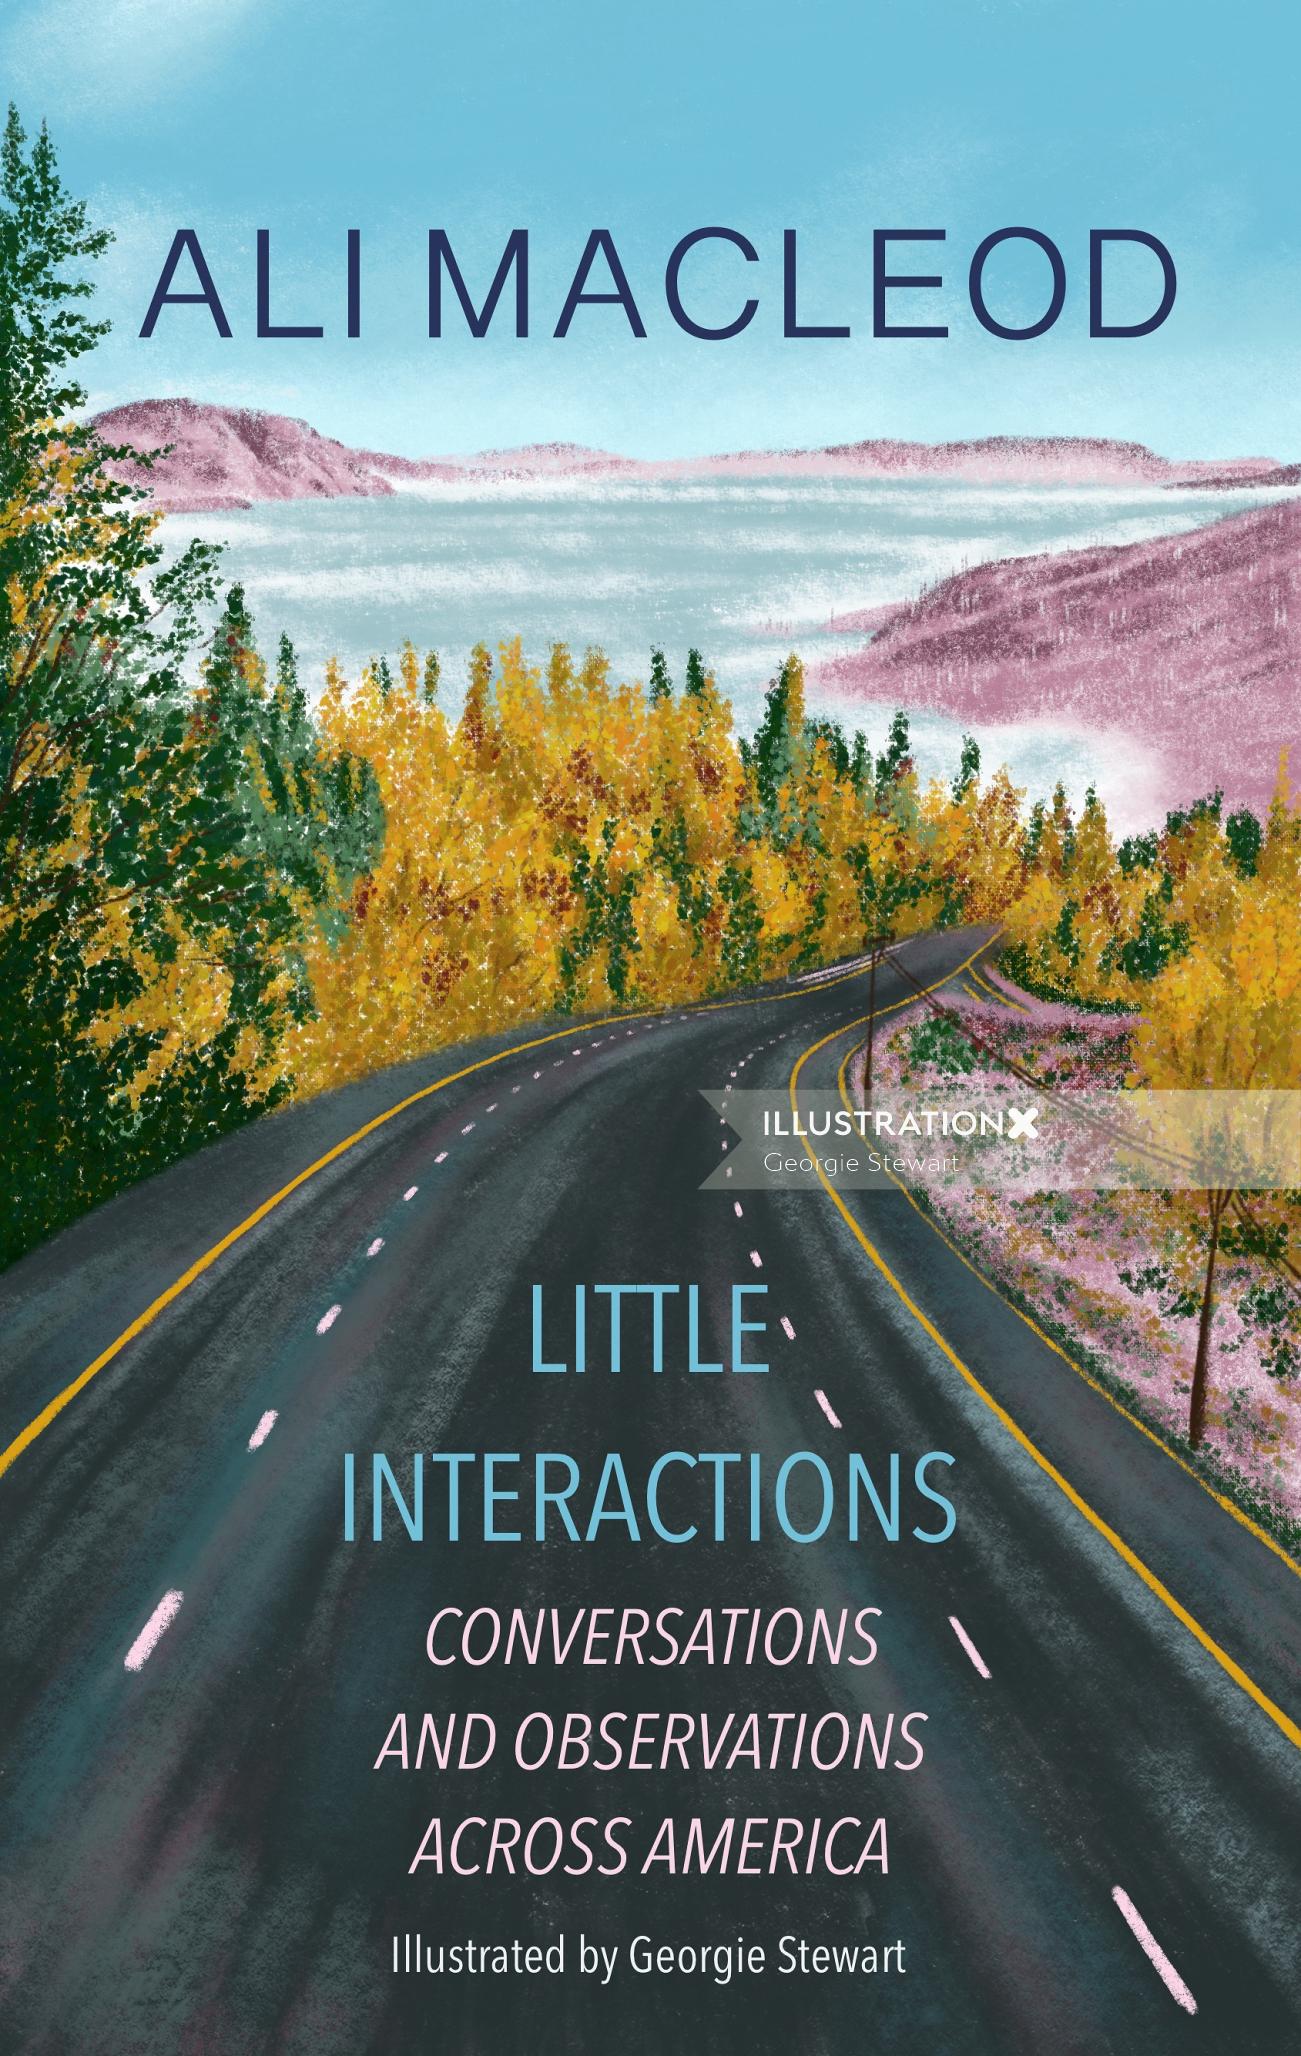 Cover artwork for Ali MacLeod’s for ‘Little Interactions